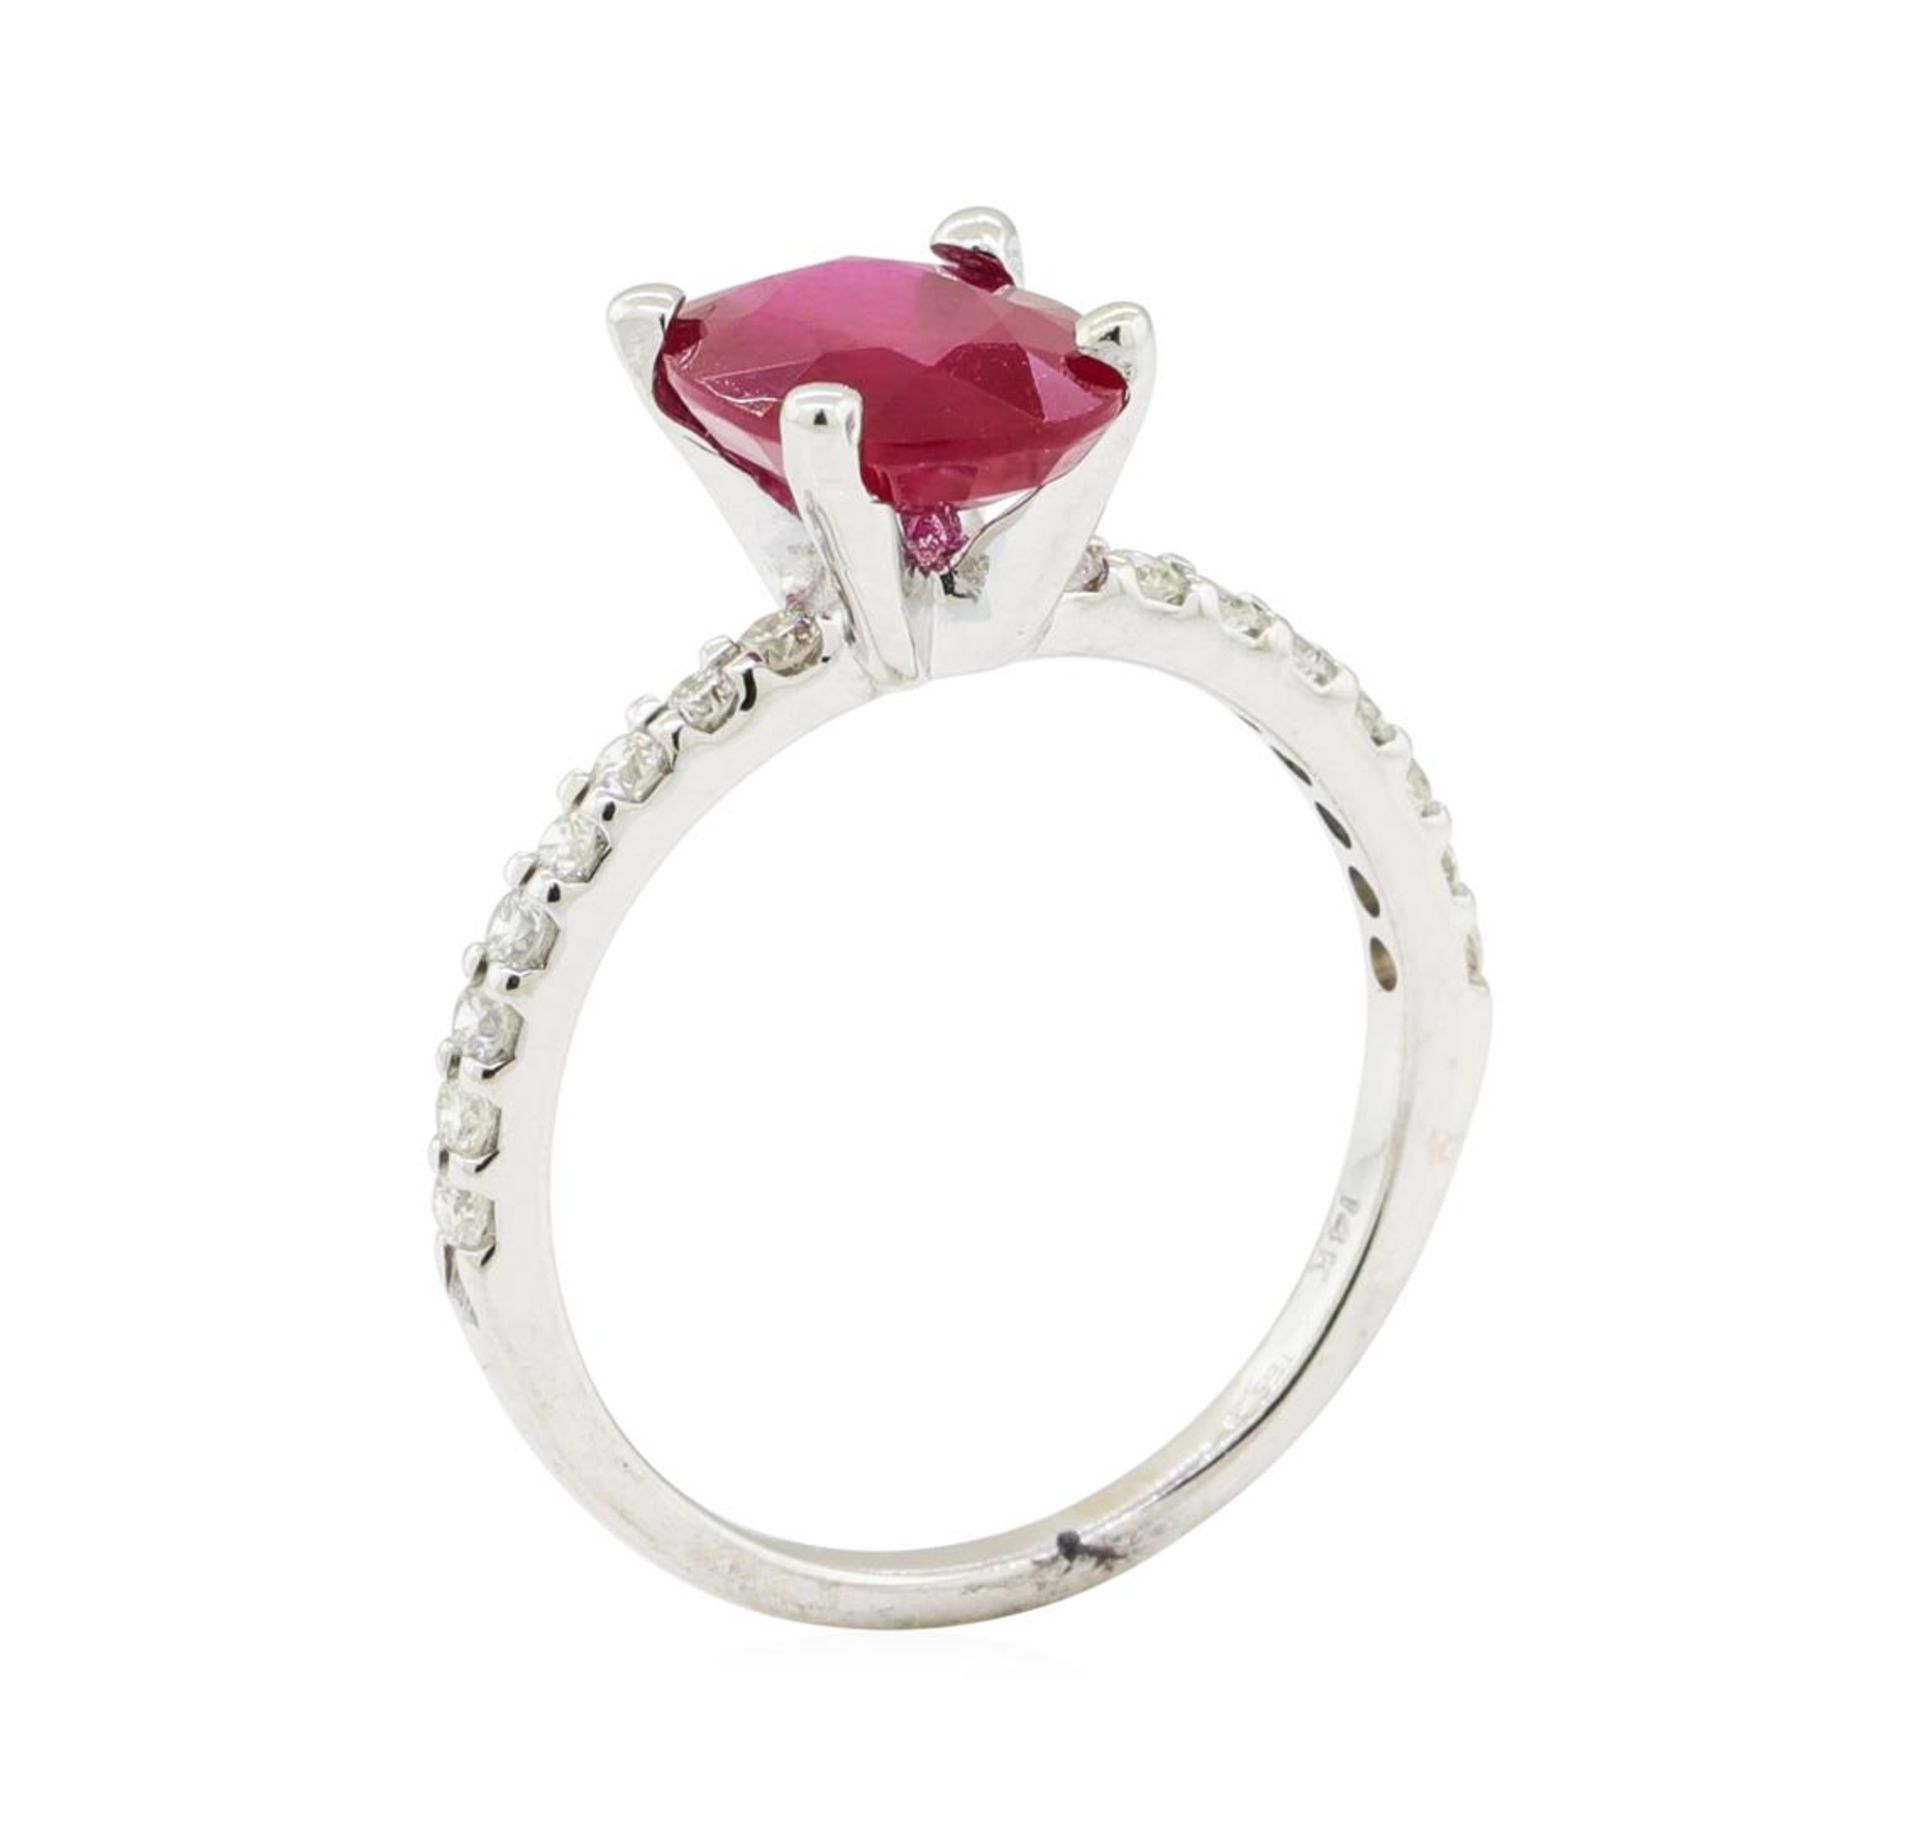 2.38 ctw Glass Filled Natural Ruby and Diamond Ring - 14KT White Gold - Image 4 of 4